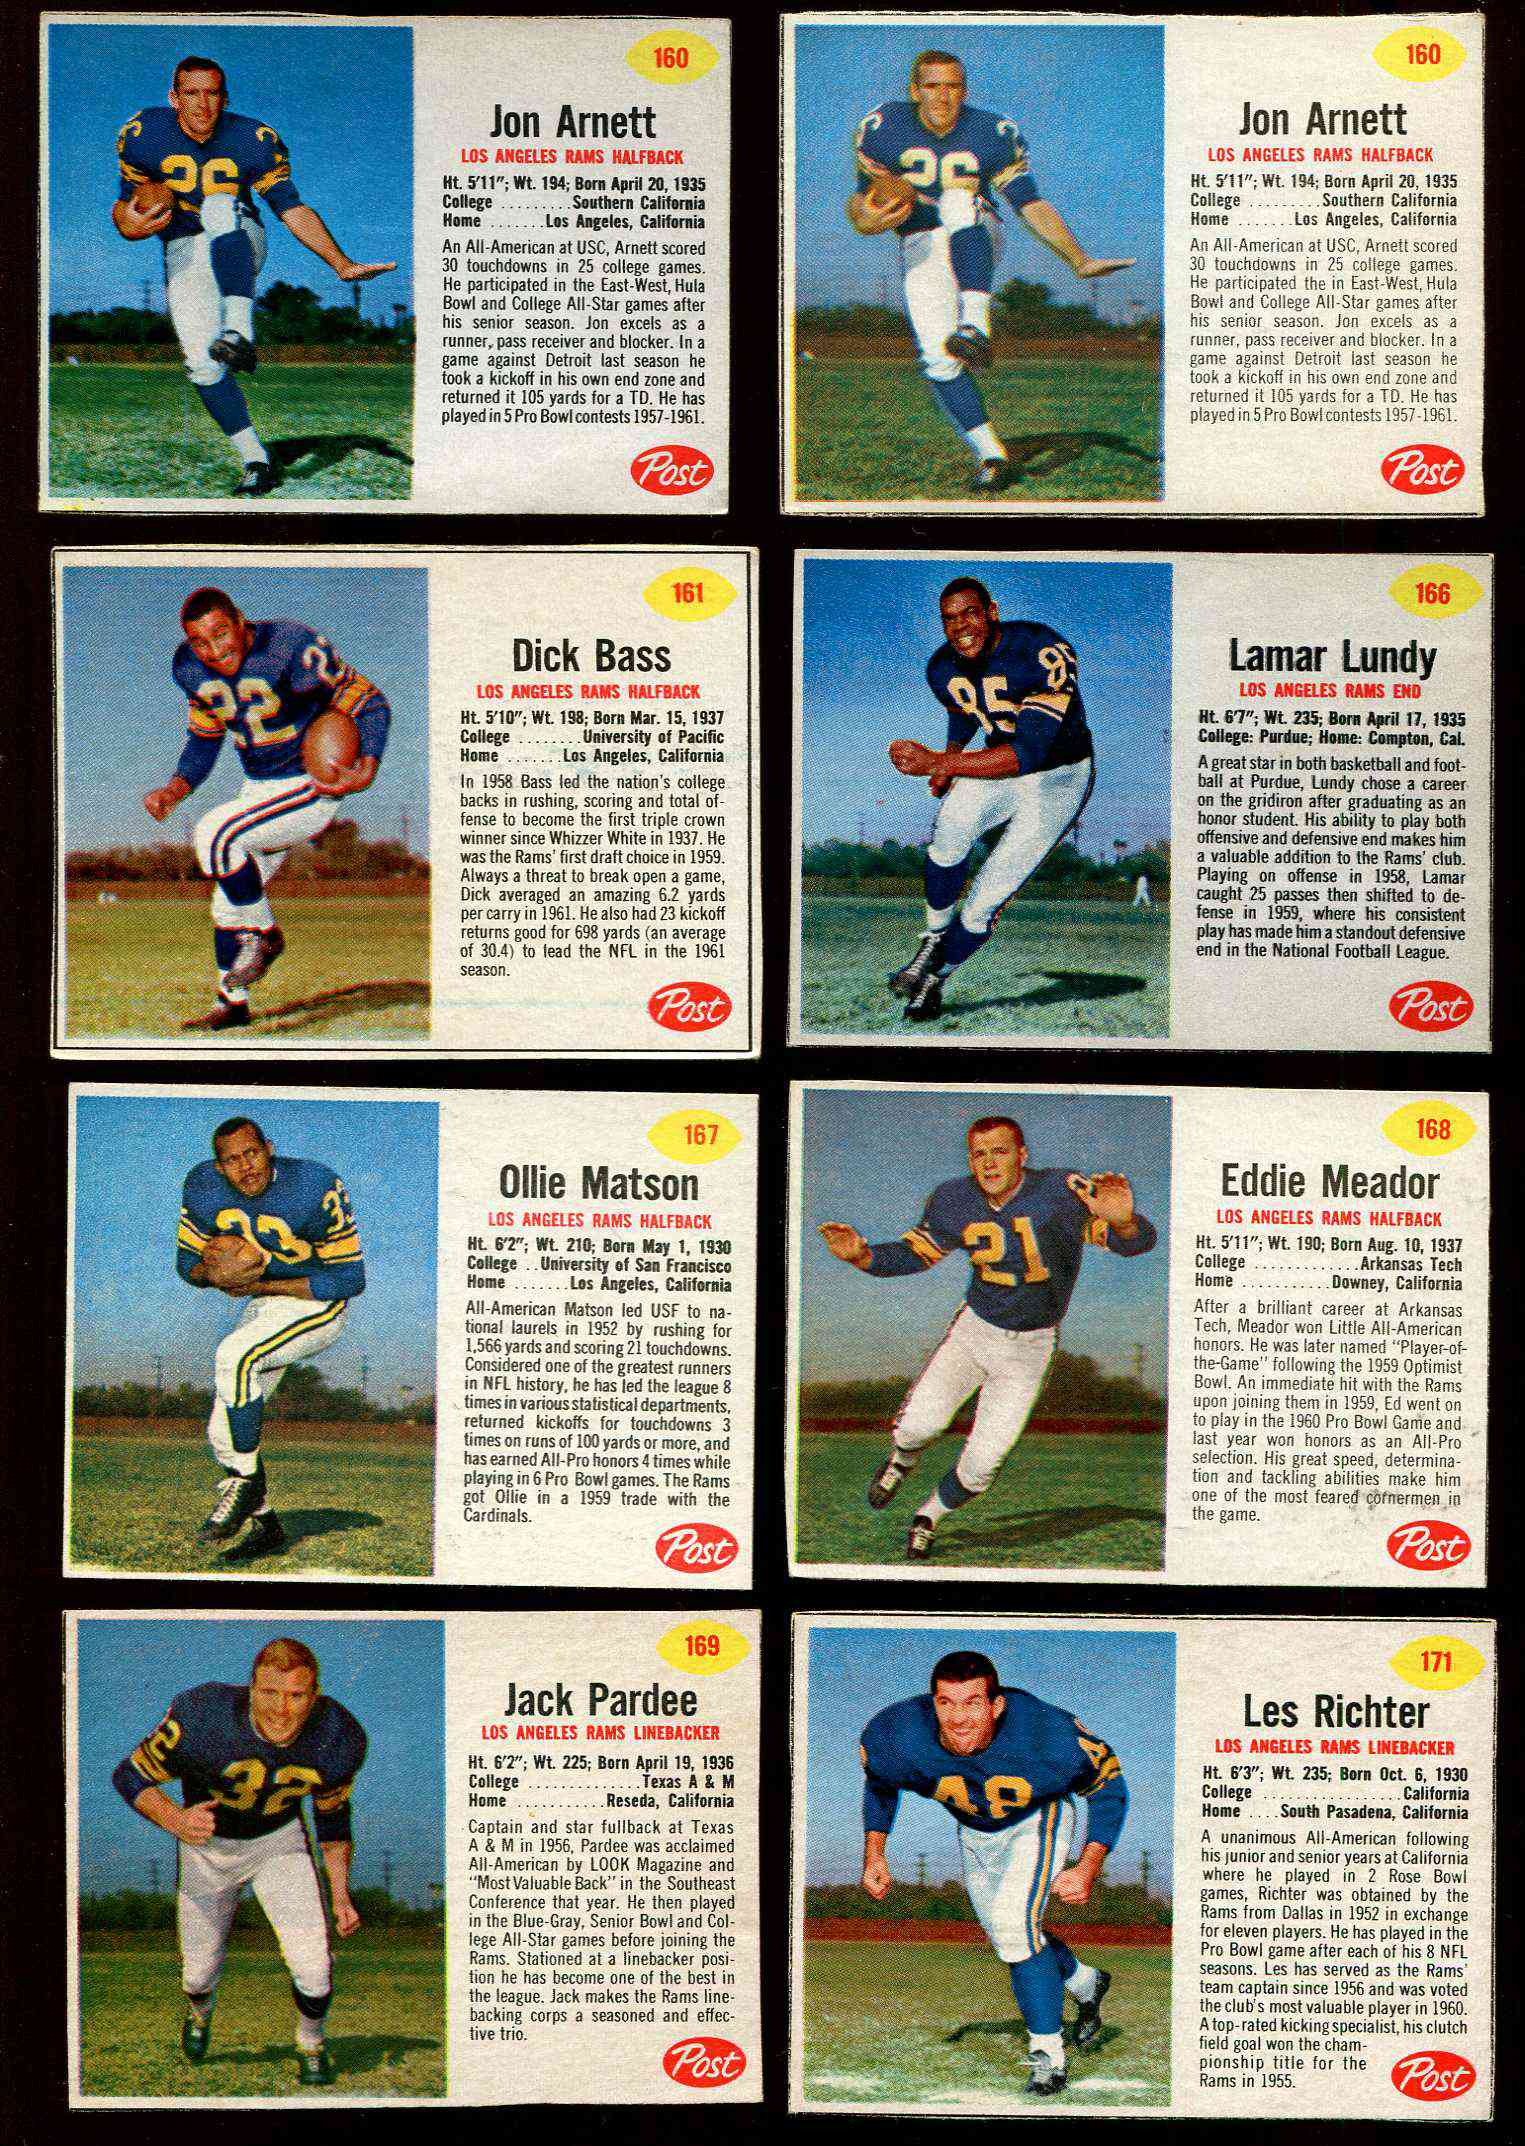 1962 Post Cereal FB #169 Jack Pardee SHORT PRINT (Rams) Football cards value